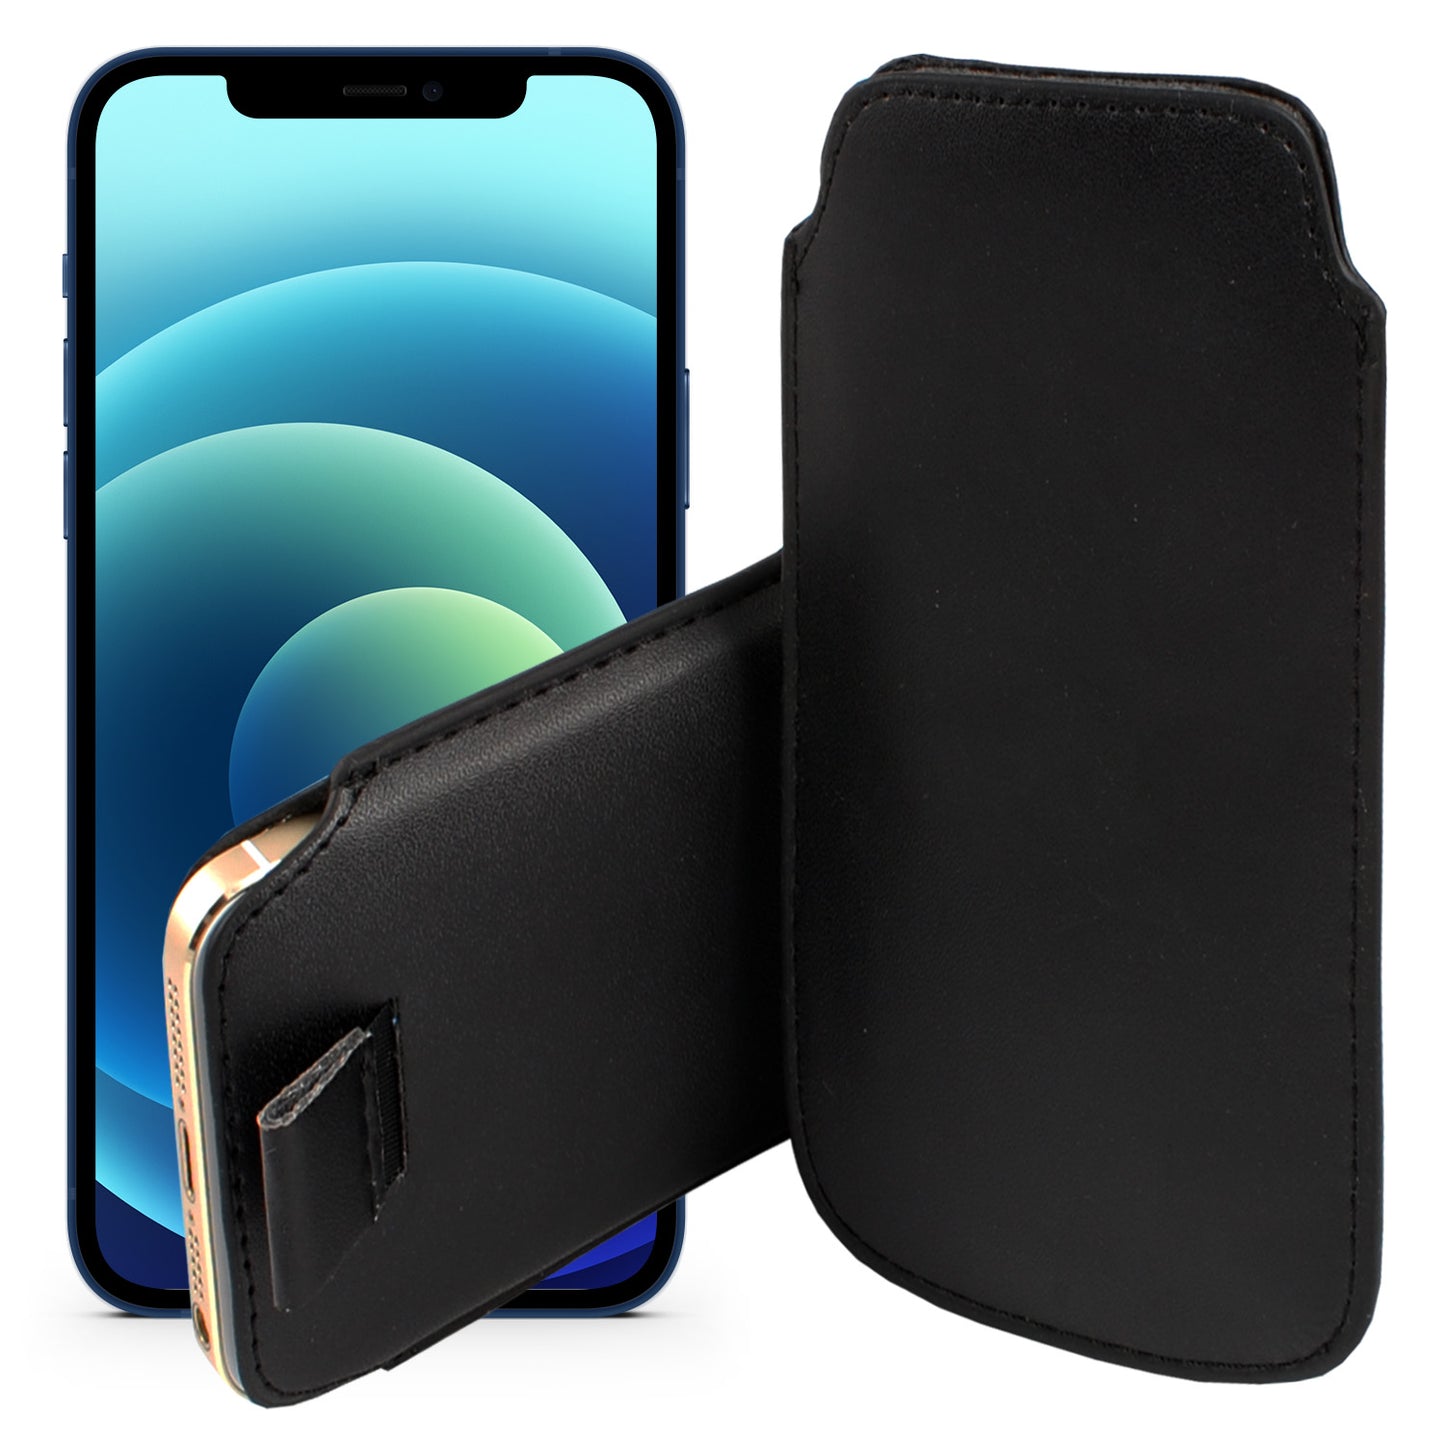 MEZON Apple iPhone 12 Mini (5.4") Pull Tab Slim Faux Leather Pouch Sleeve Case – Shock Absorption – Black